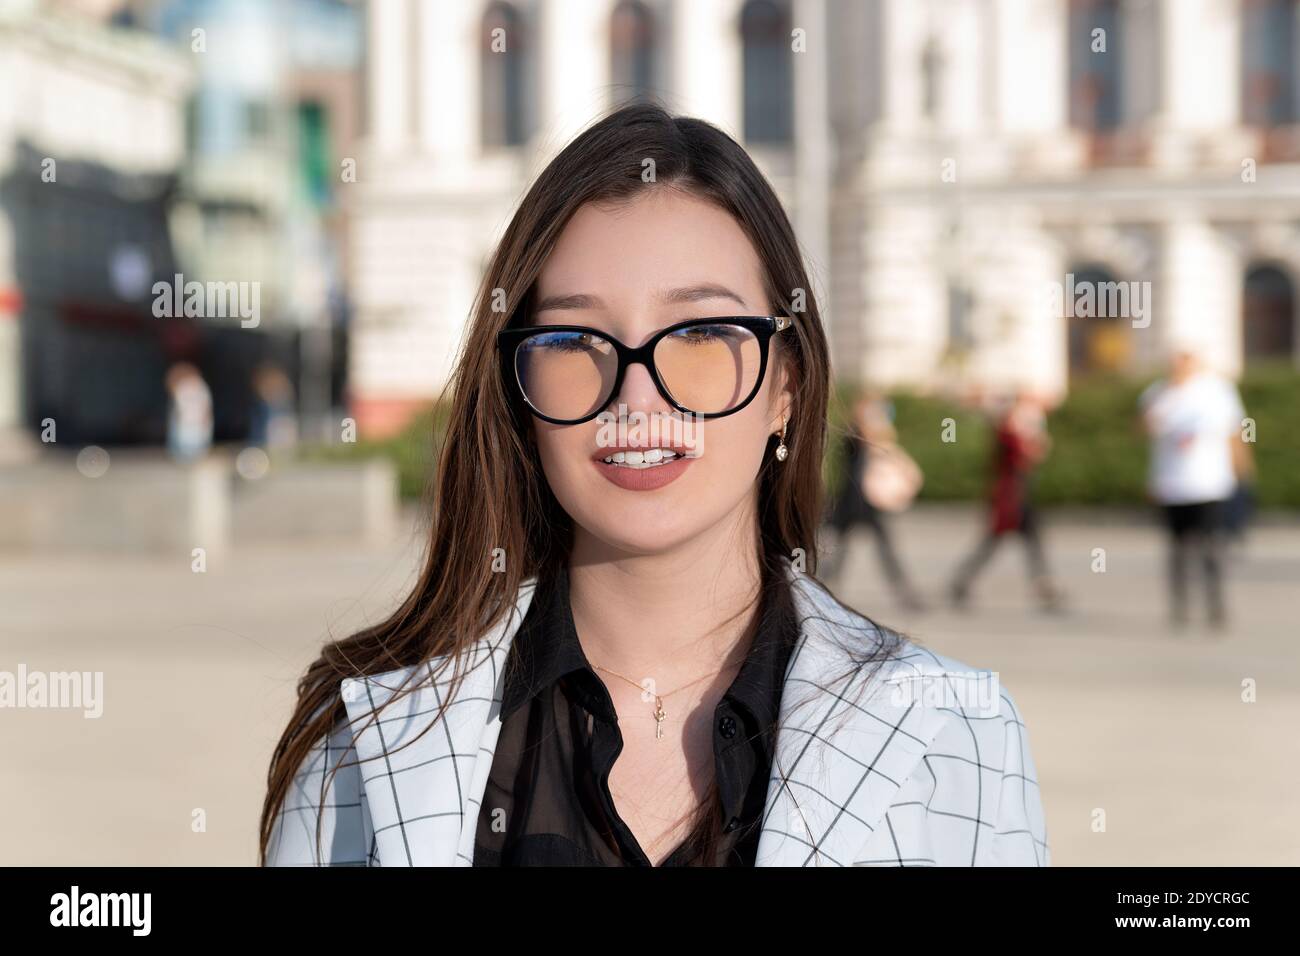 Portrait of young brunette woman wearing glasses. Student against institute background. Postgraduate teacher. Stock Photo